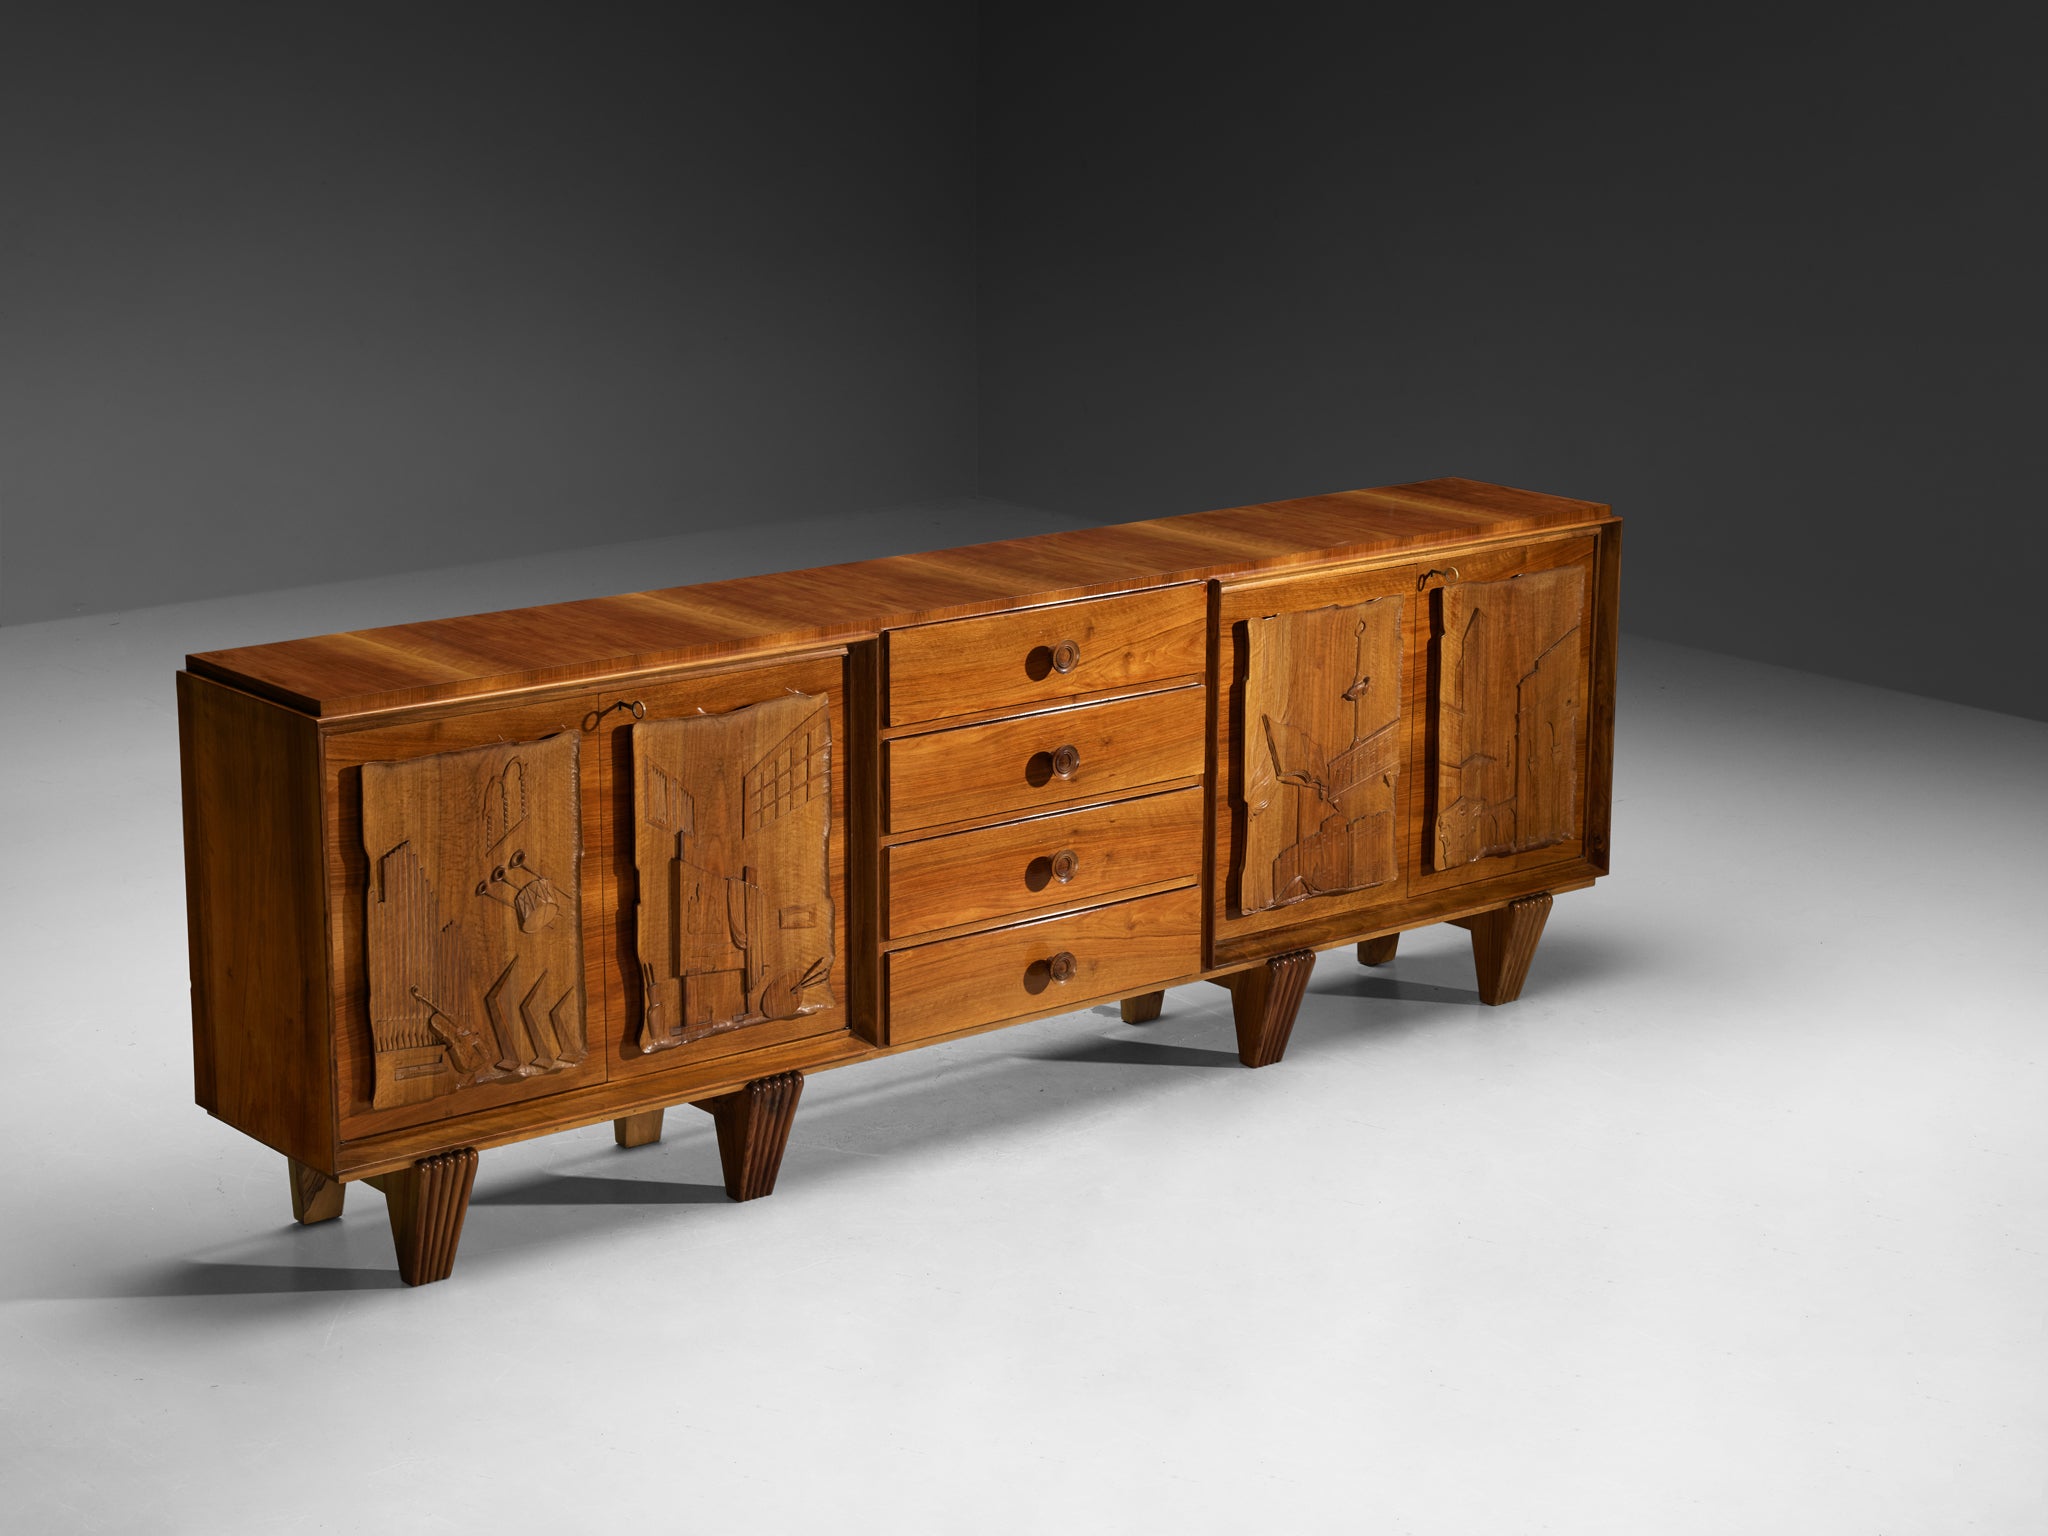 1940s Italian Sideboard in Walnut with Decorative Carvings by Artisan Maker